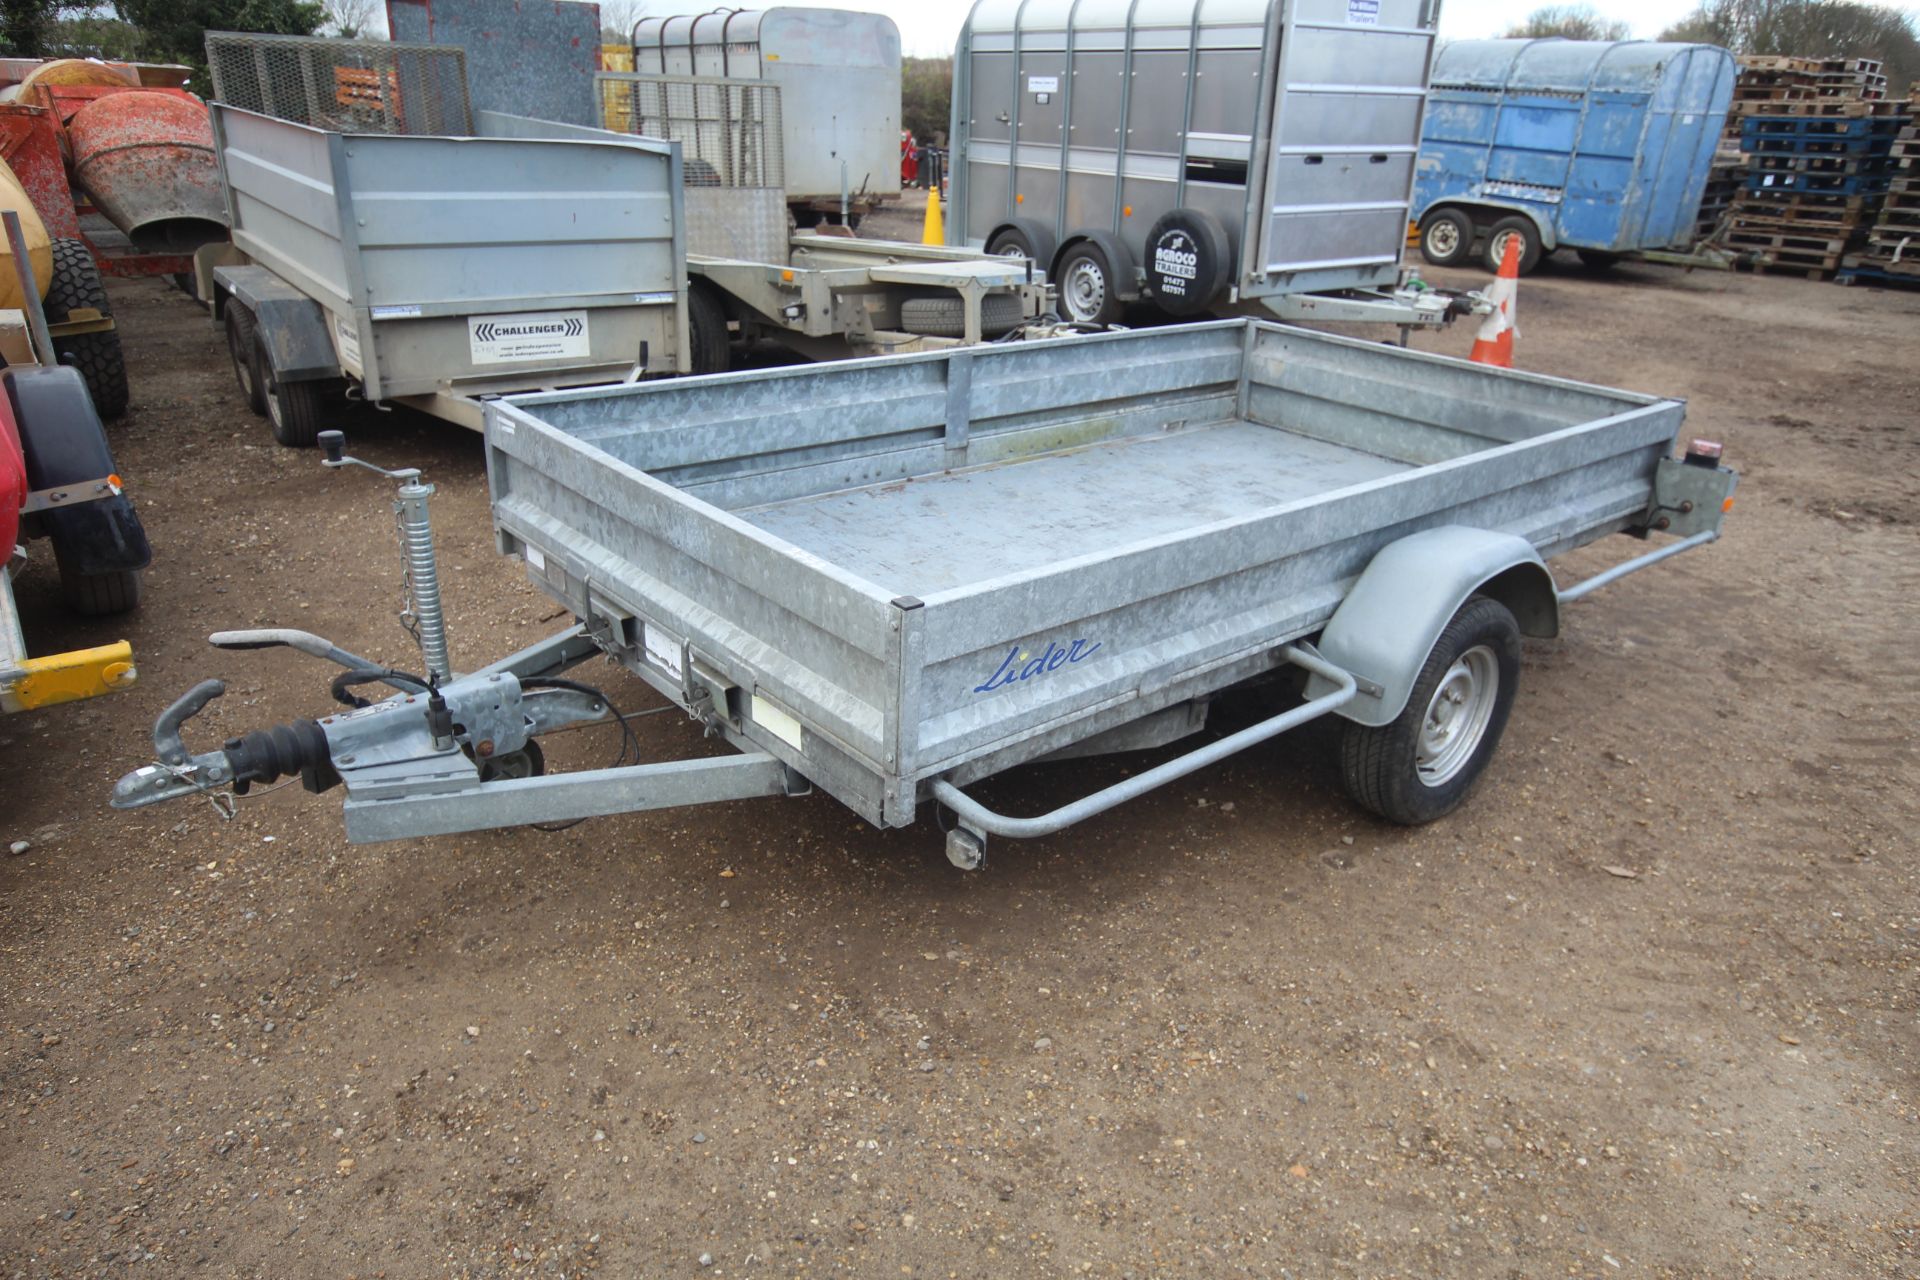 Lider 1T 10ft x 5ft 6in single axle tilt bed trailer. With brakes, bolt on sides, recent new tyres